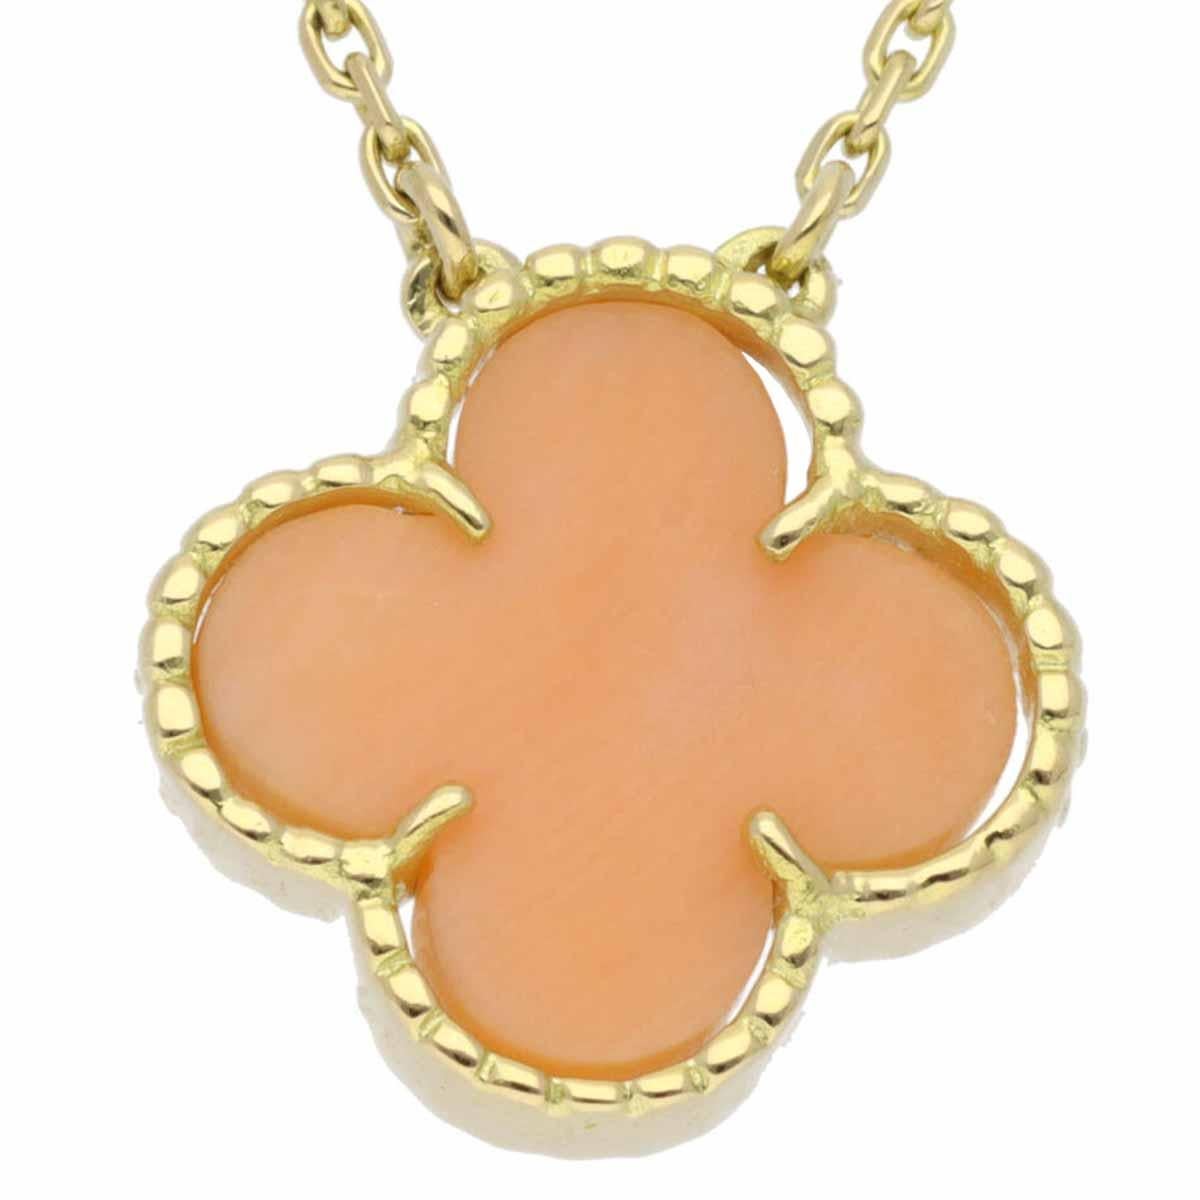 Brand:Van Cleef&Arpels
Name:Vintage Alhambra Pendant Necklace
Material:Coral, 750 K18 YG Yellow Gold
Weight:5.0g(Approx）
neck around:37-42cm / 14.56in-16.53in(Approx）
Top size:H14.57mm×W14.92mm / H0.57in×W0.58in(Approx）
Comes with:Van Cleef & Arpels